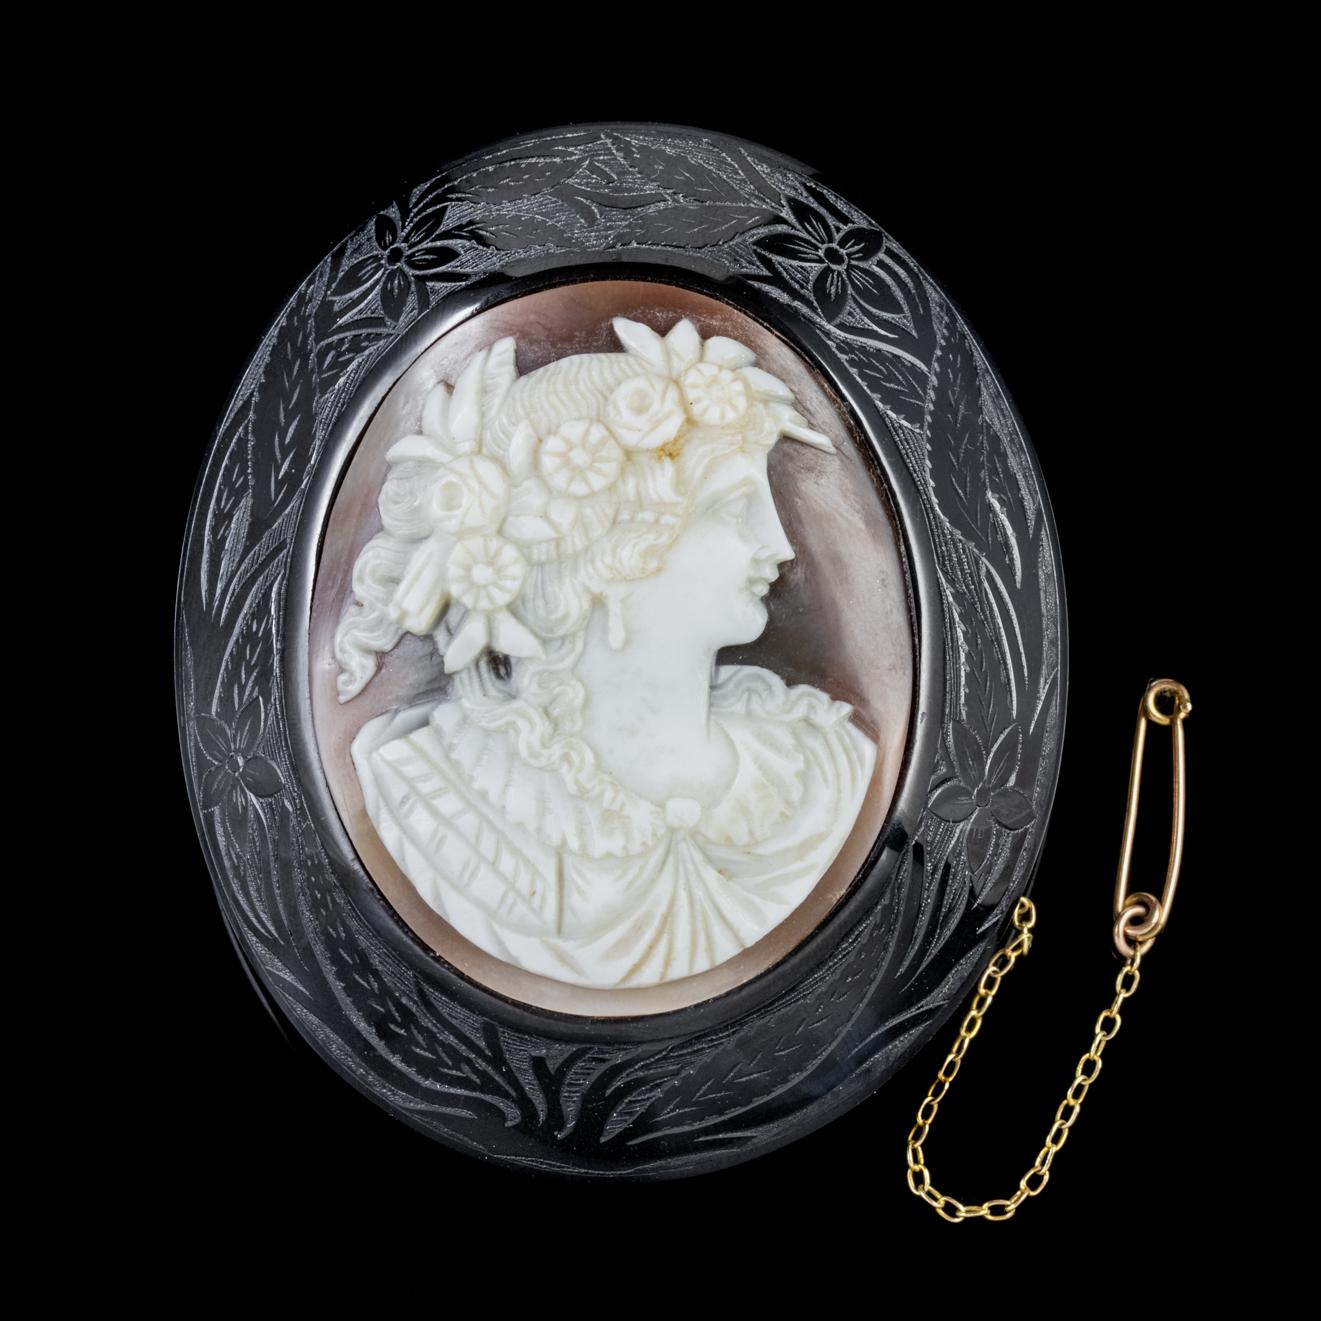 An exquisite Antique Cameo brooch dating from the mid-Victorian era, Circa 1860. The Cameo depicts the side profile of an elegant lady with flowers woven into her long ringlets. It has been hand carved from Bullmouth Shell by an expert hand with